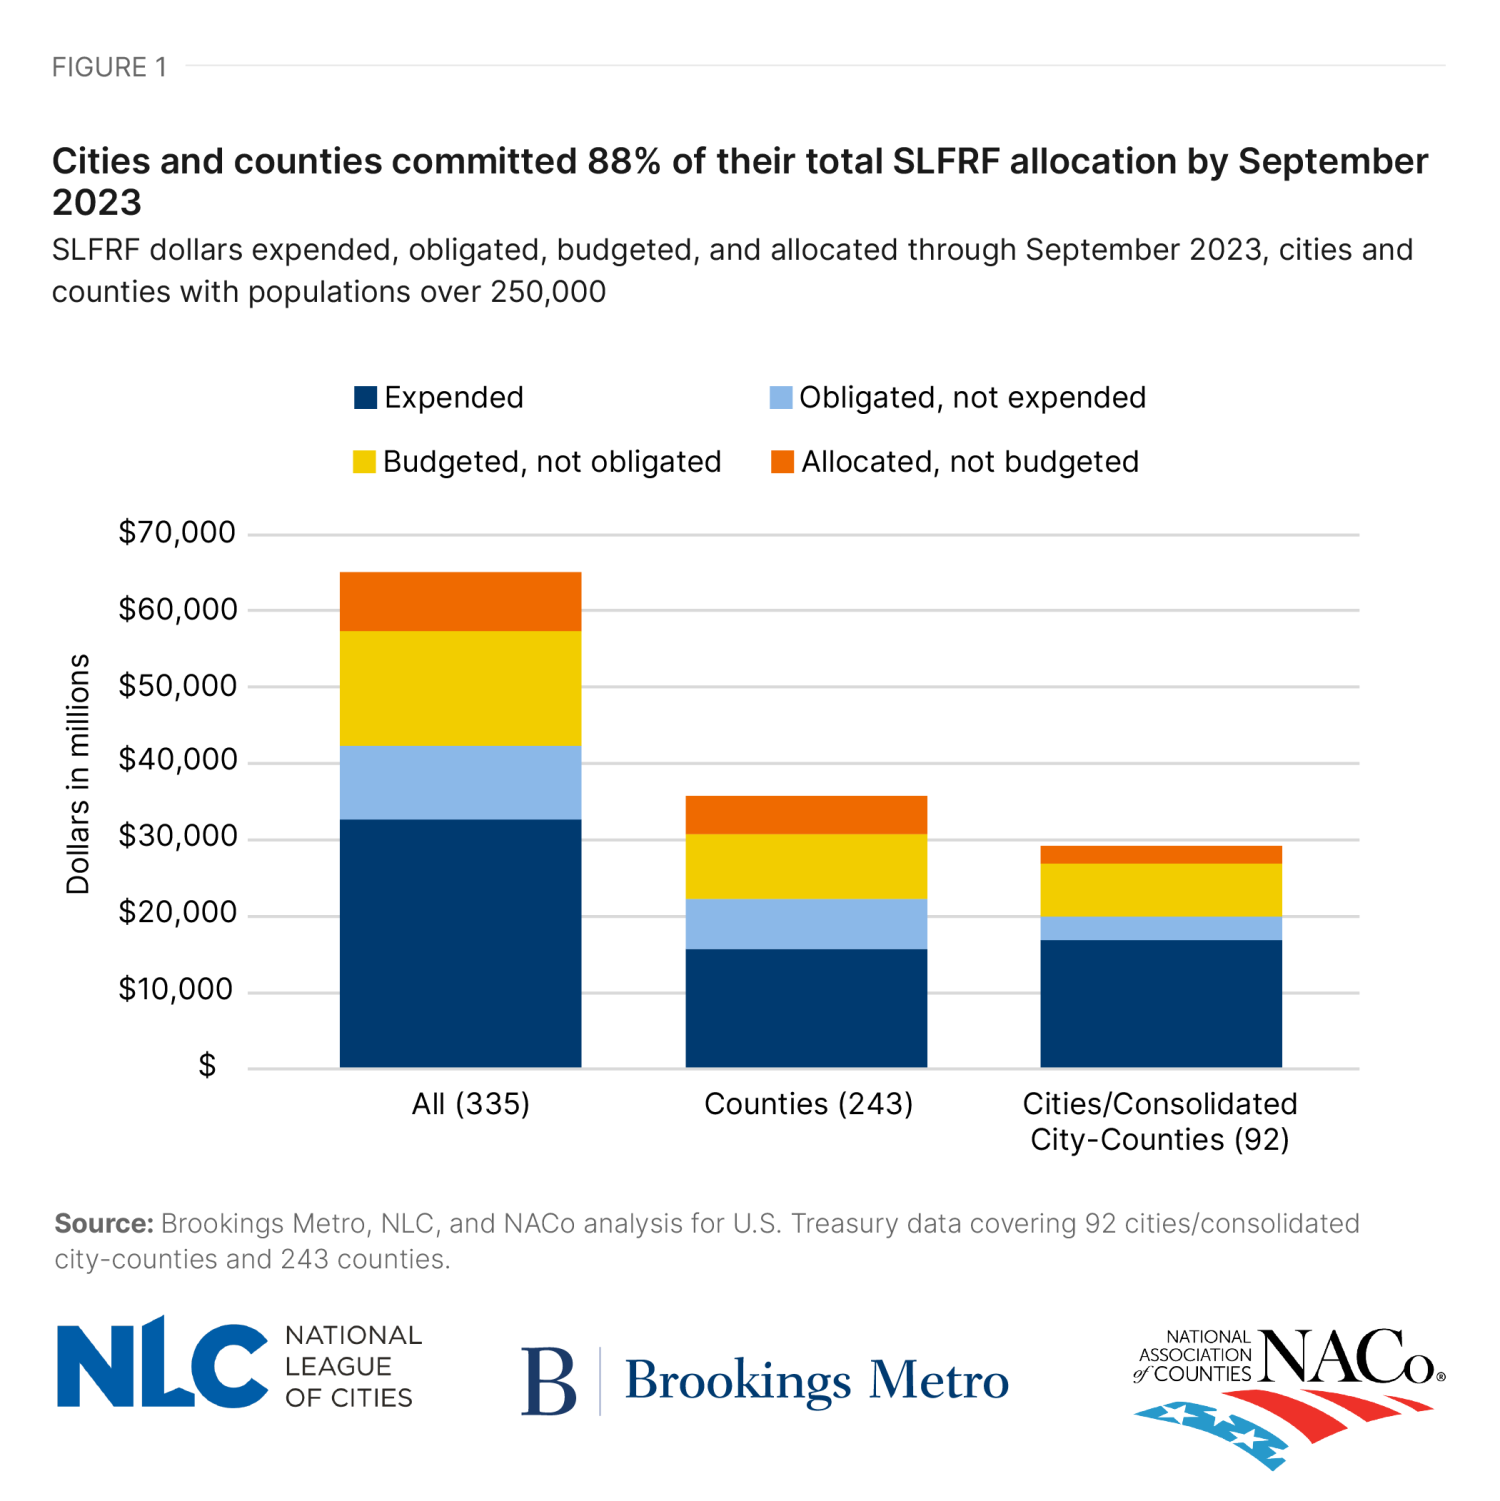 Figure 1: Cities and counties committed 88% of their total SLFRF allocation by September 2023